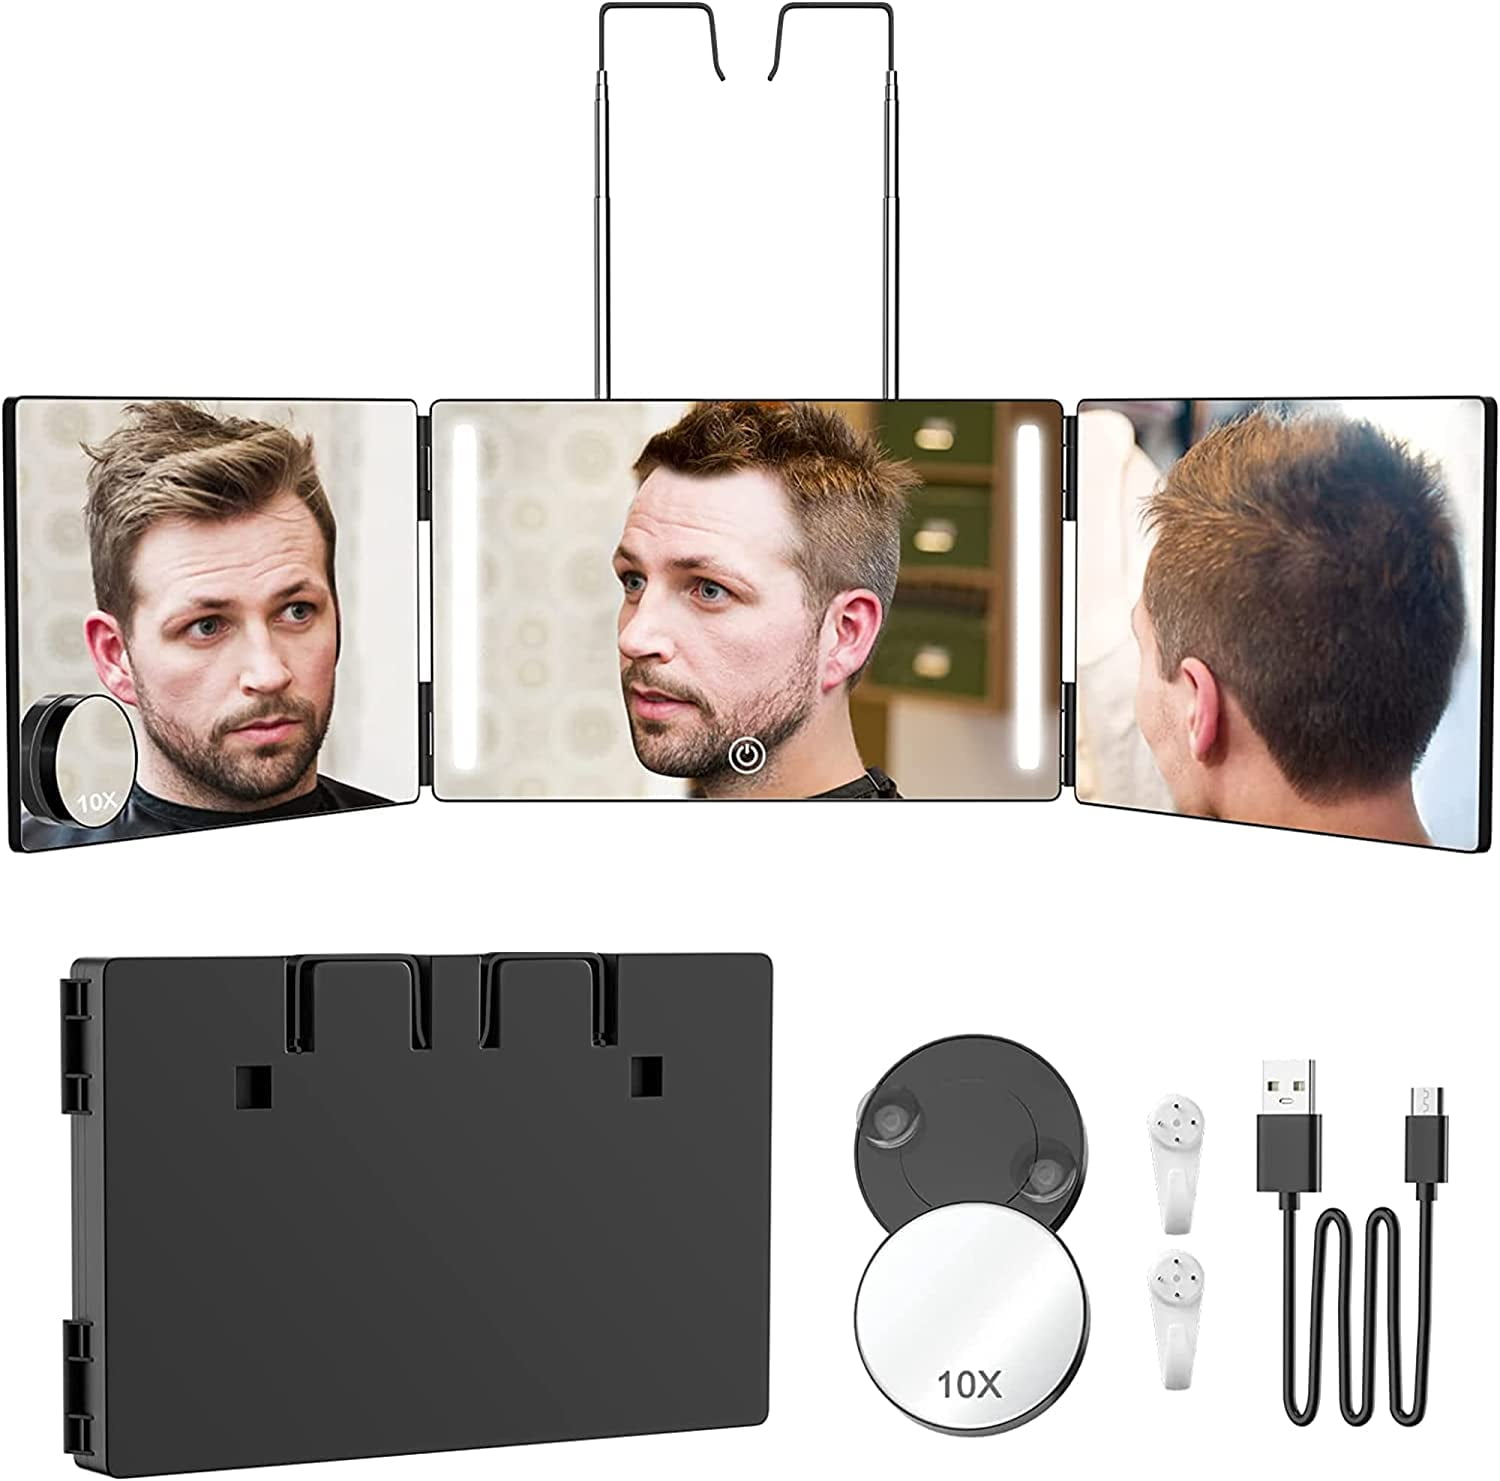 Selfcut 360° Mirror, Trifold 3 Way Mirror for Hair Cutting with LED Lights, Self  Haircut System for Haircut, Shaver and Makeup with Height Adjustable  Telescoping Hooks